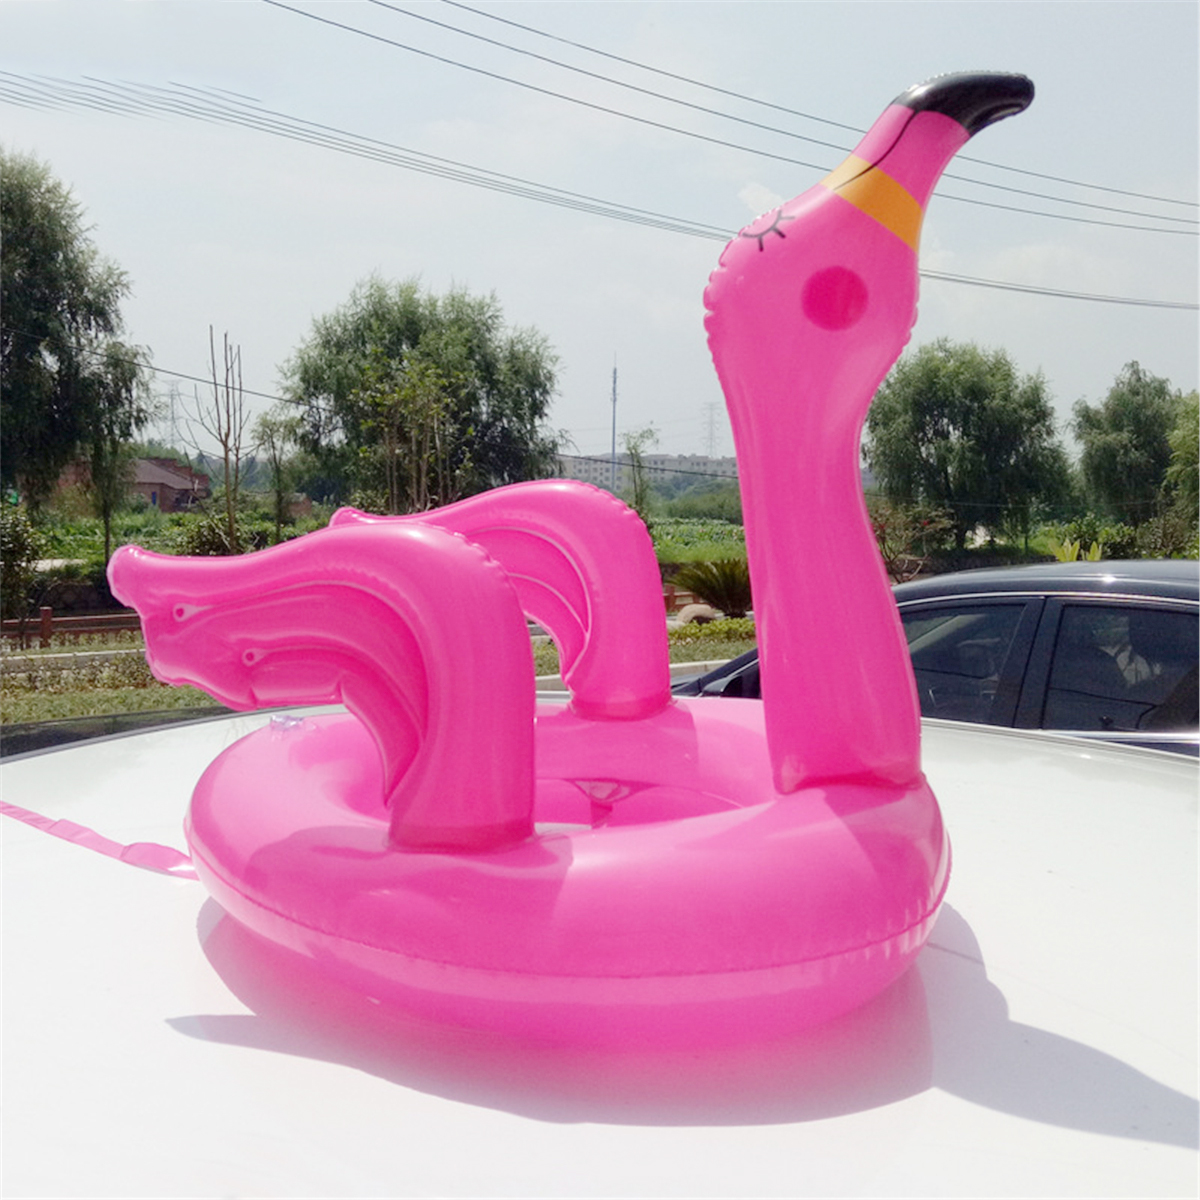 Inflatable-Flamingo-Ring-Toss-Game-For-Family-Party-Pool-Garden-Throwing-Toys-1626091-7